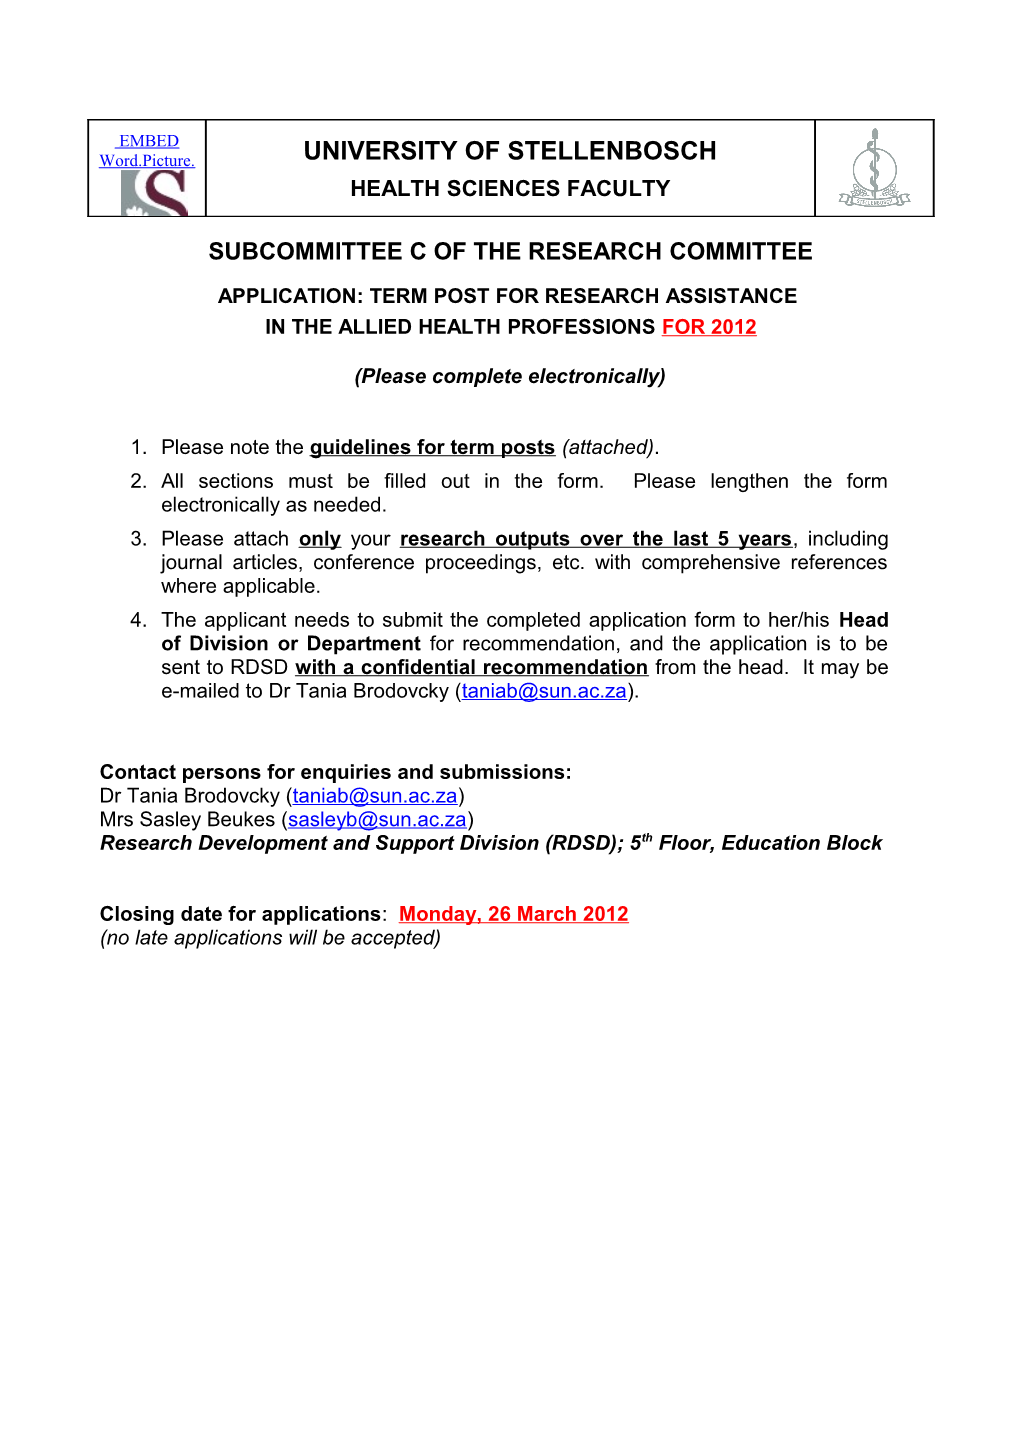 Subcommittee C of the Research Committee